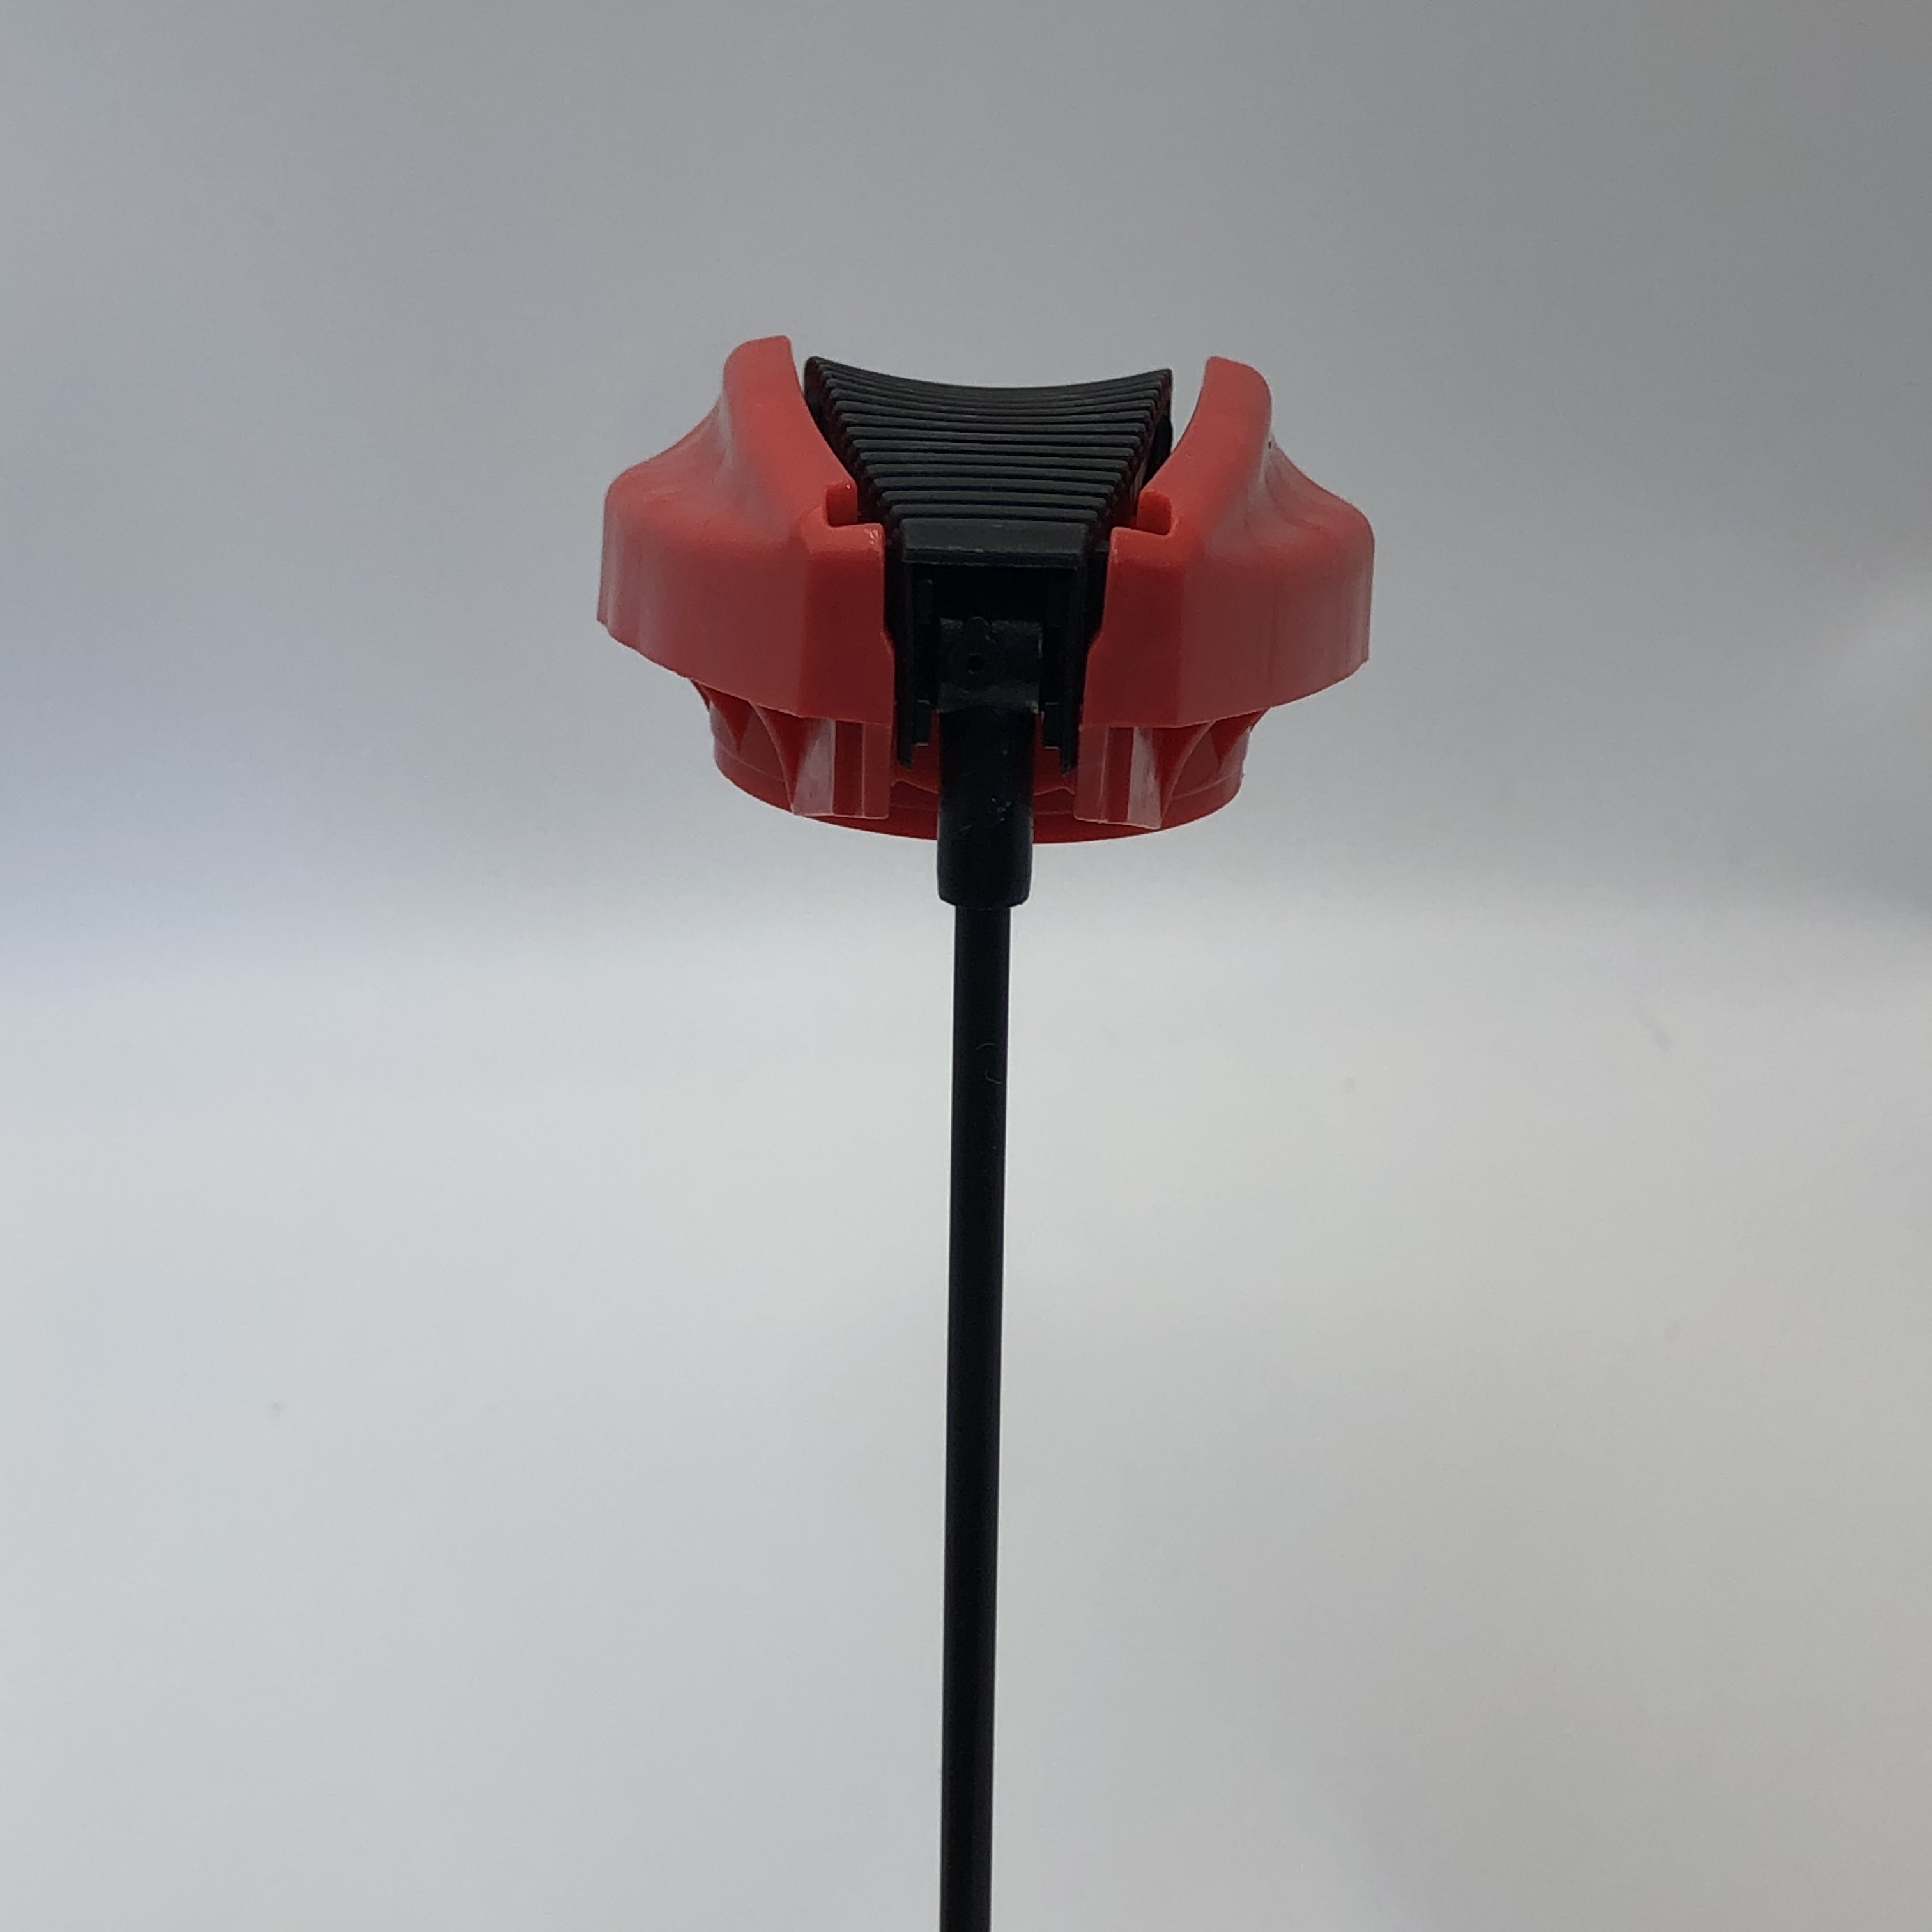 Telescopic Watering Wand Extendable Garden Sprayer with Adjustable Nozzle Reach High and Low Areas with Ease